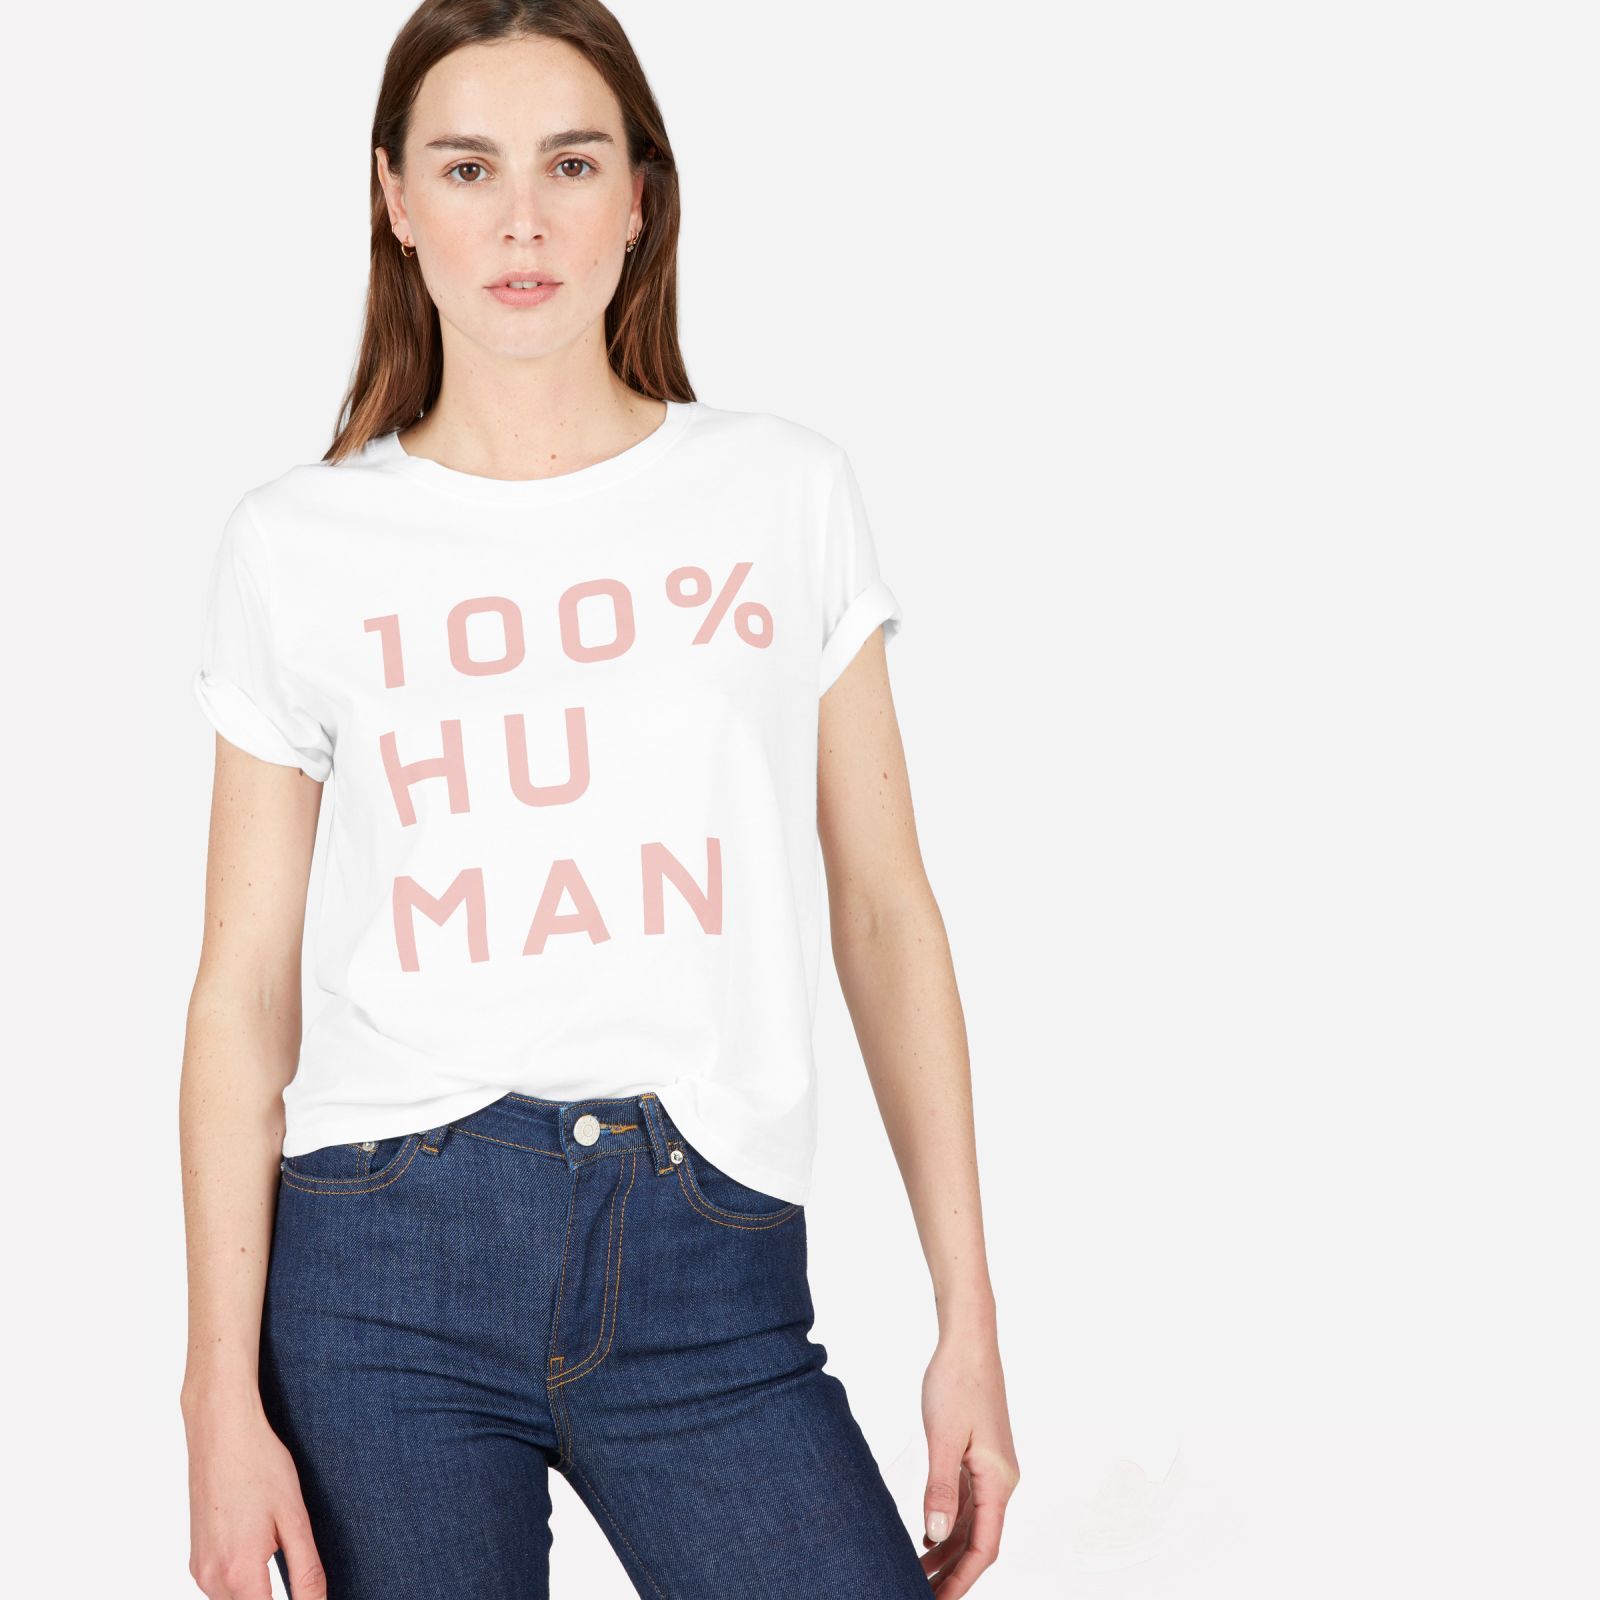 Women's 100% Human Box-Cut T-Shirt in Large Print by Everlane in White / Pink, Size XXS | Everlane